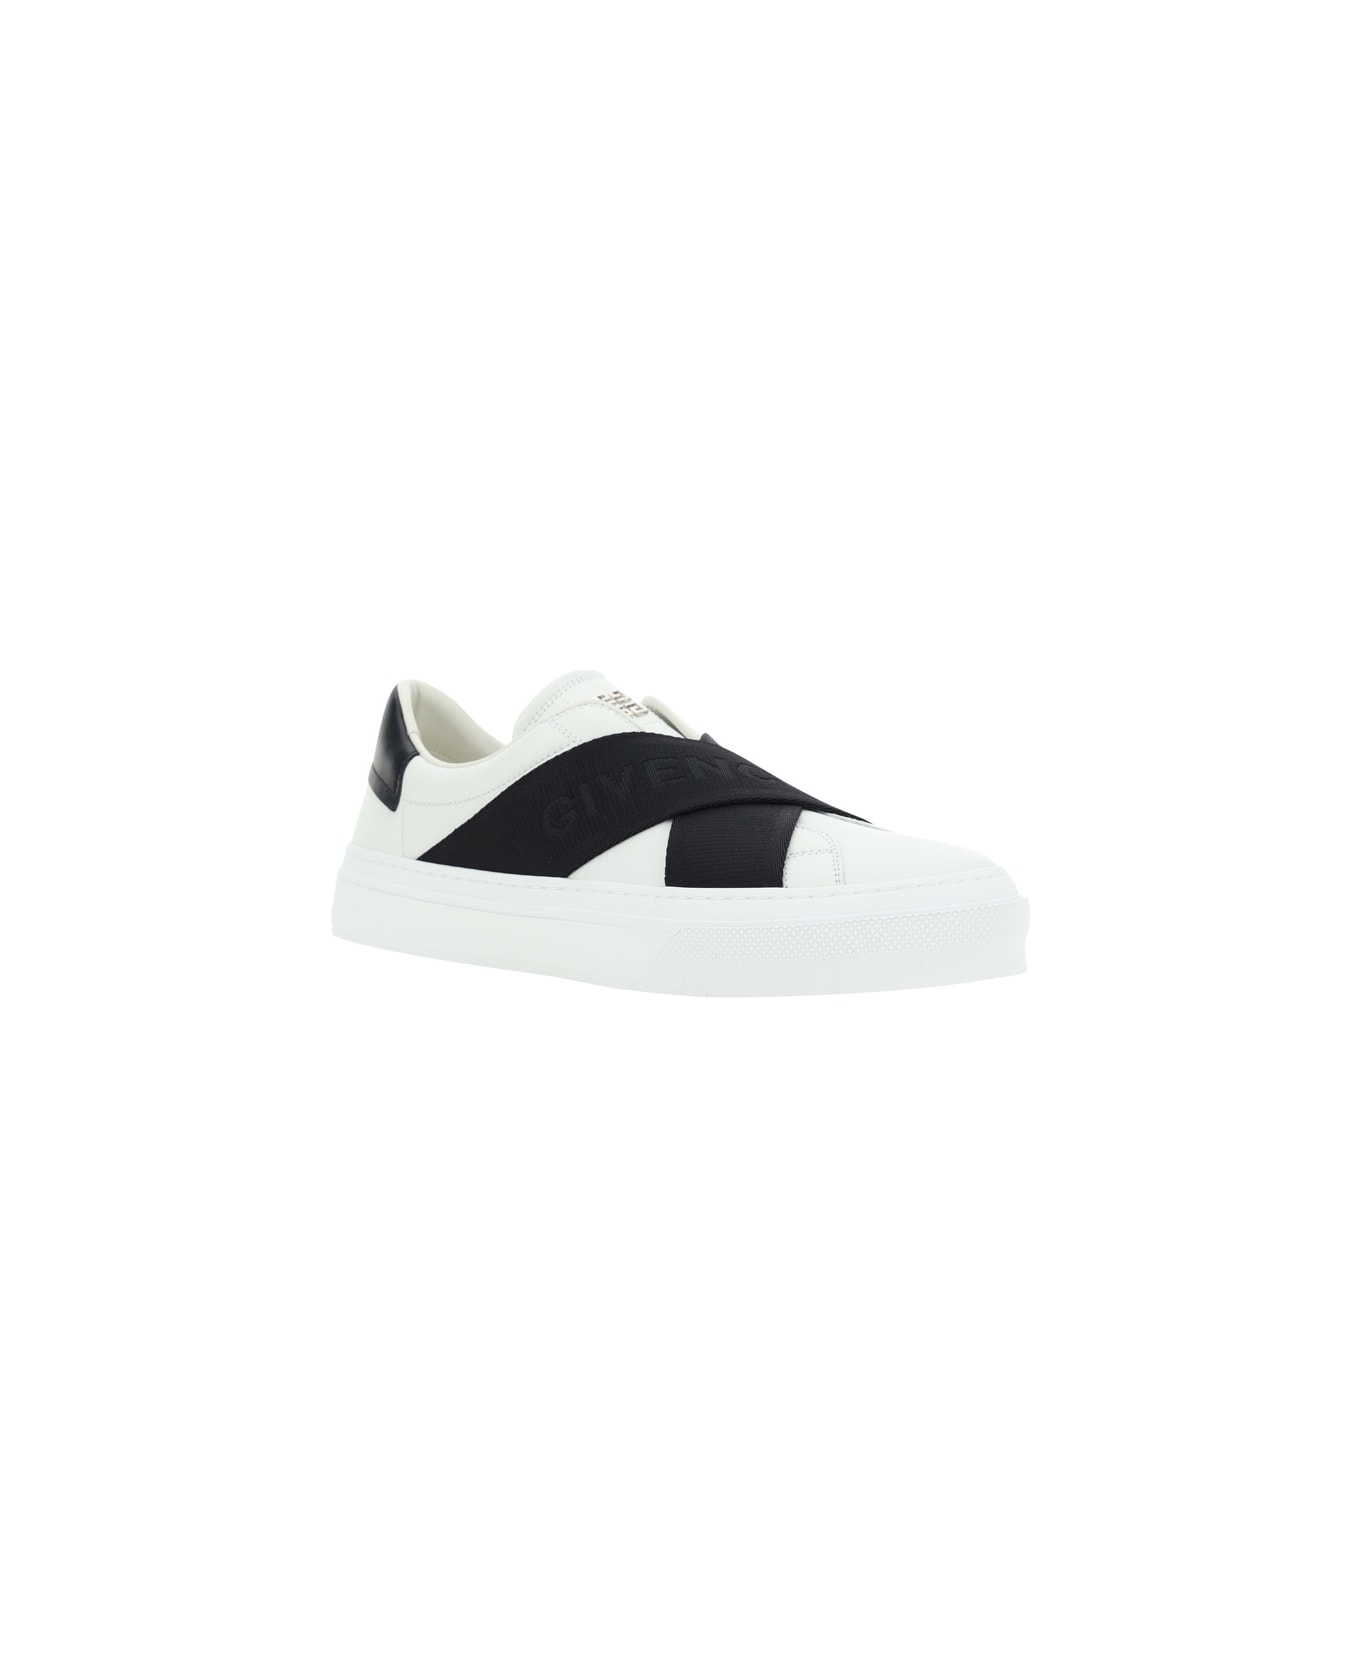 Givenchy City Sport Leather Sneakers - White/black スニーカー